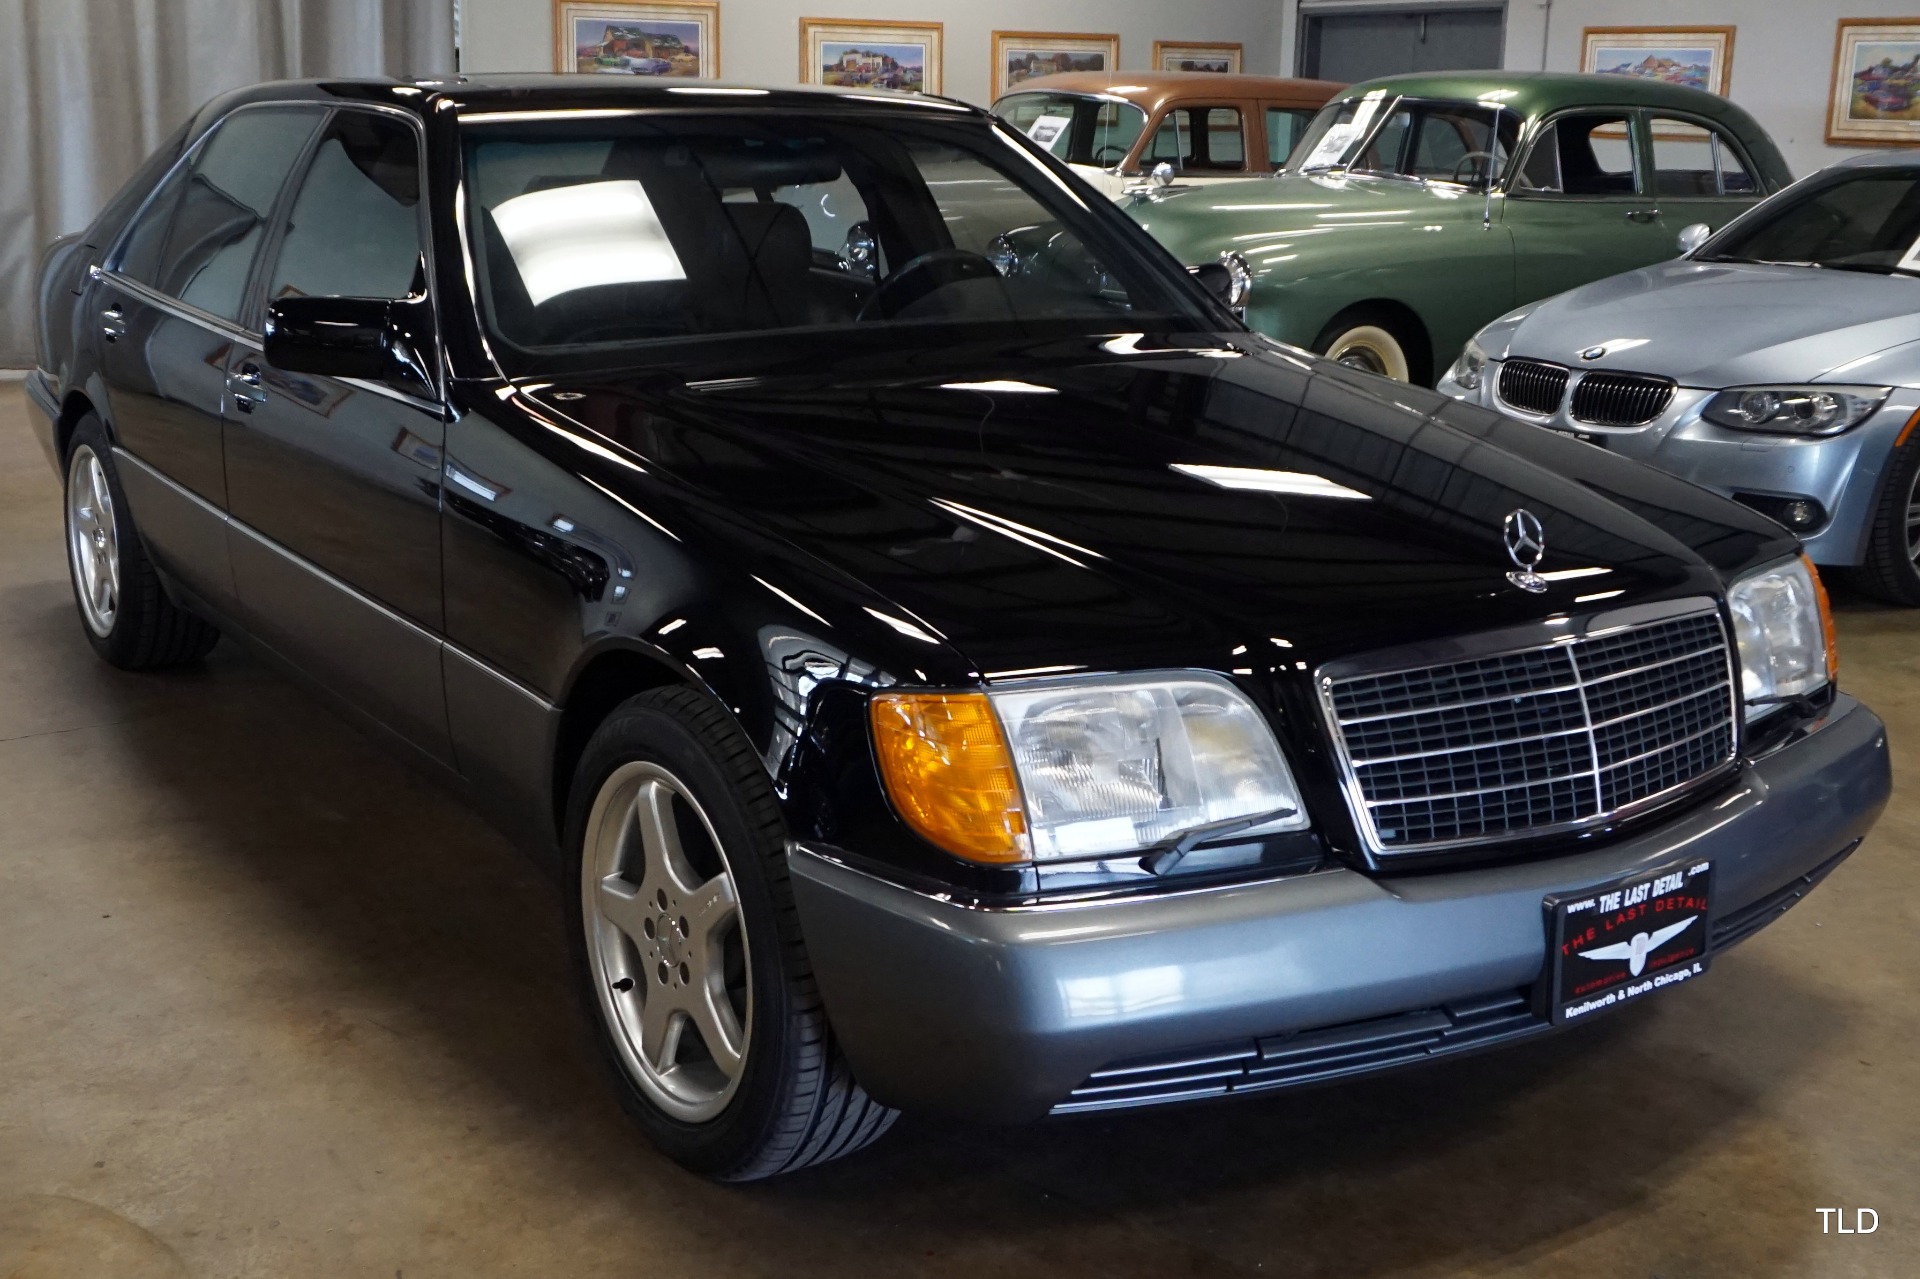 1992 Mercedes-Benz 600-Class, Black with 62150 Miles available now!